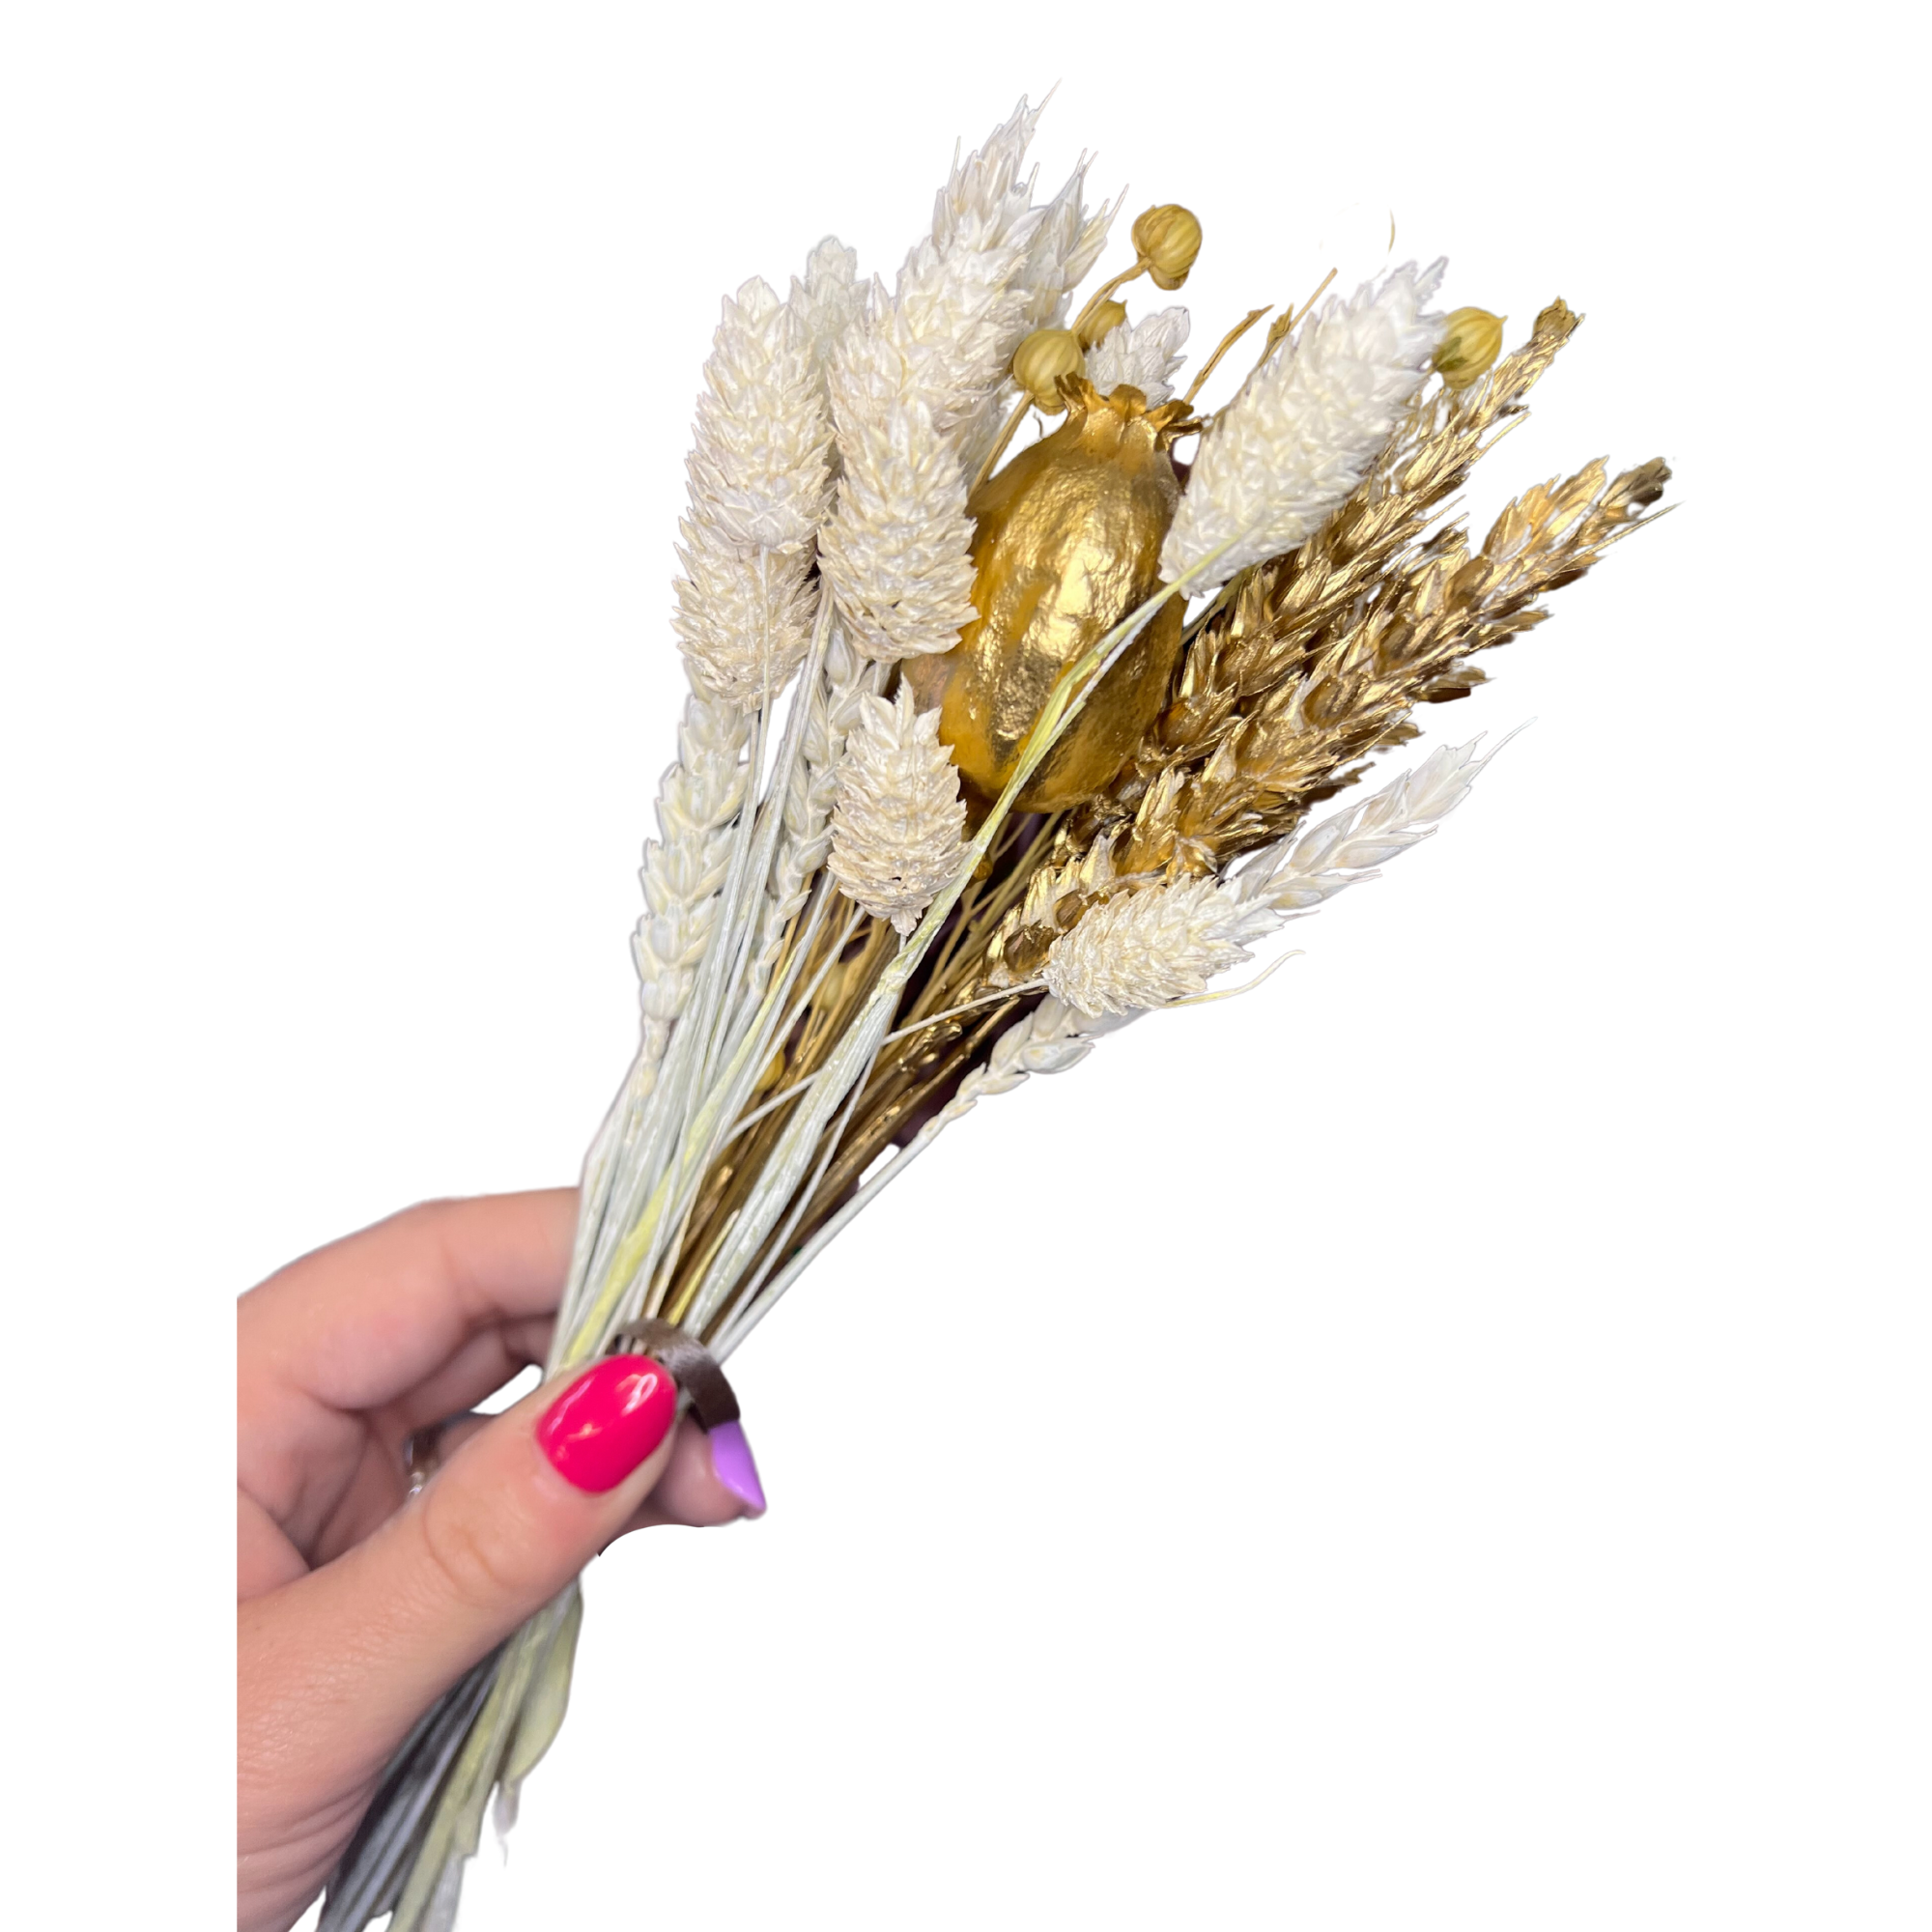 *Lucky Dip* Dried Foliage / Flower Bundle - Ideal for Cakes and Crafts